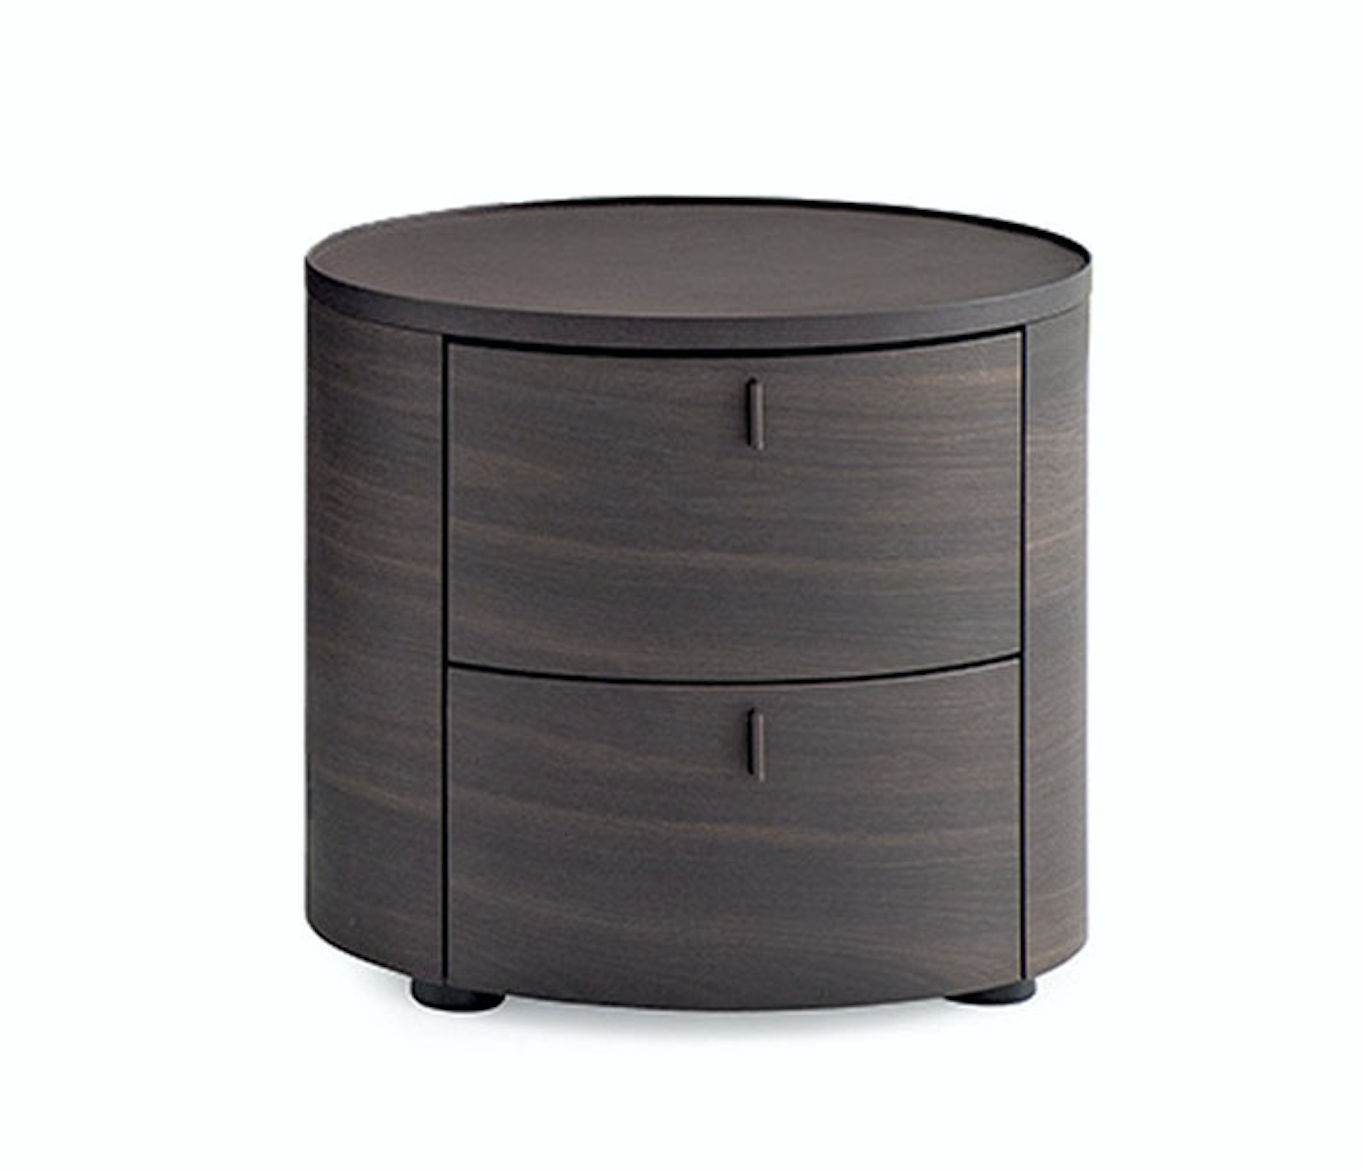 Product Image Onda bed side table